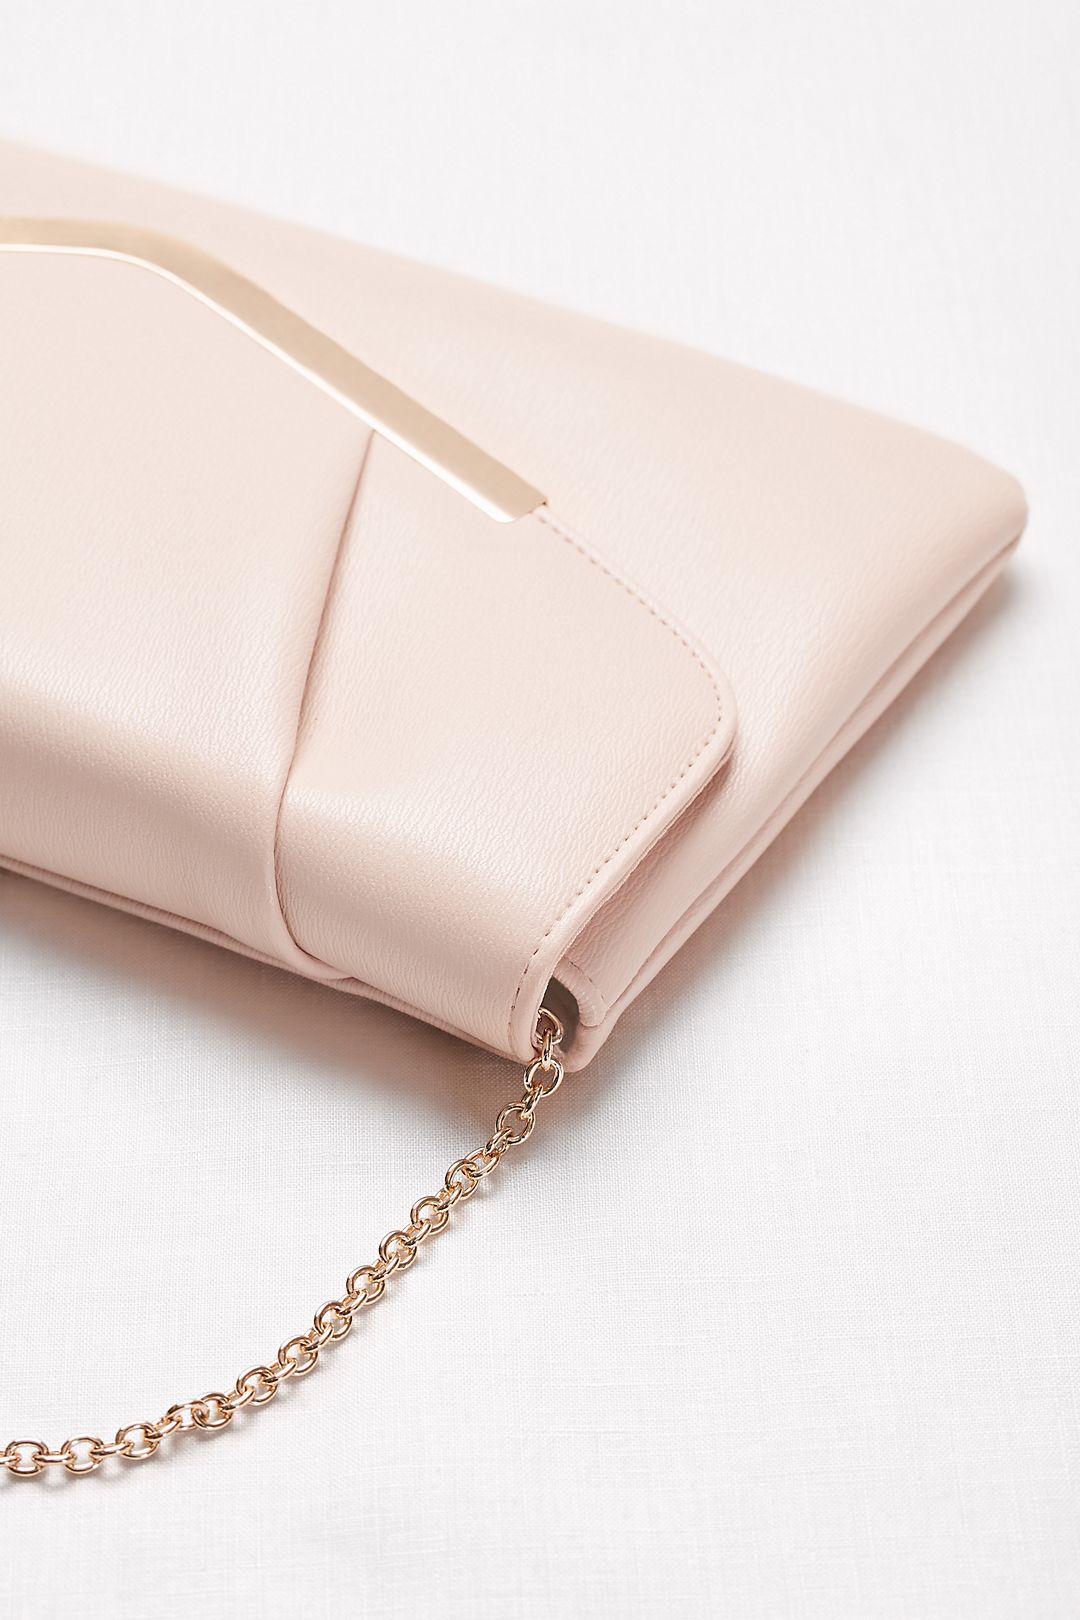 Faux-Leather Envelope Clutch with Bar Detail  Image 3